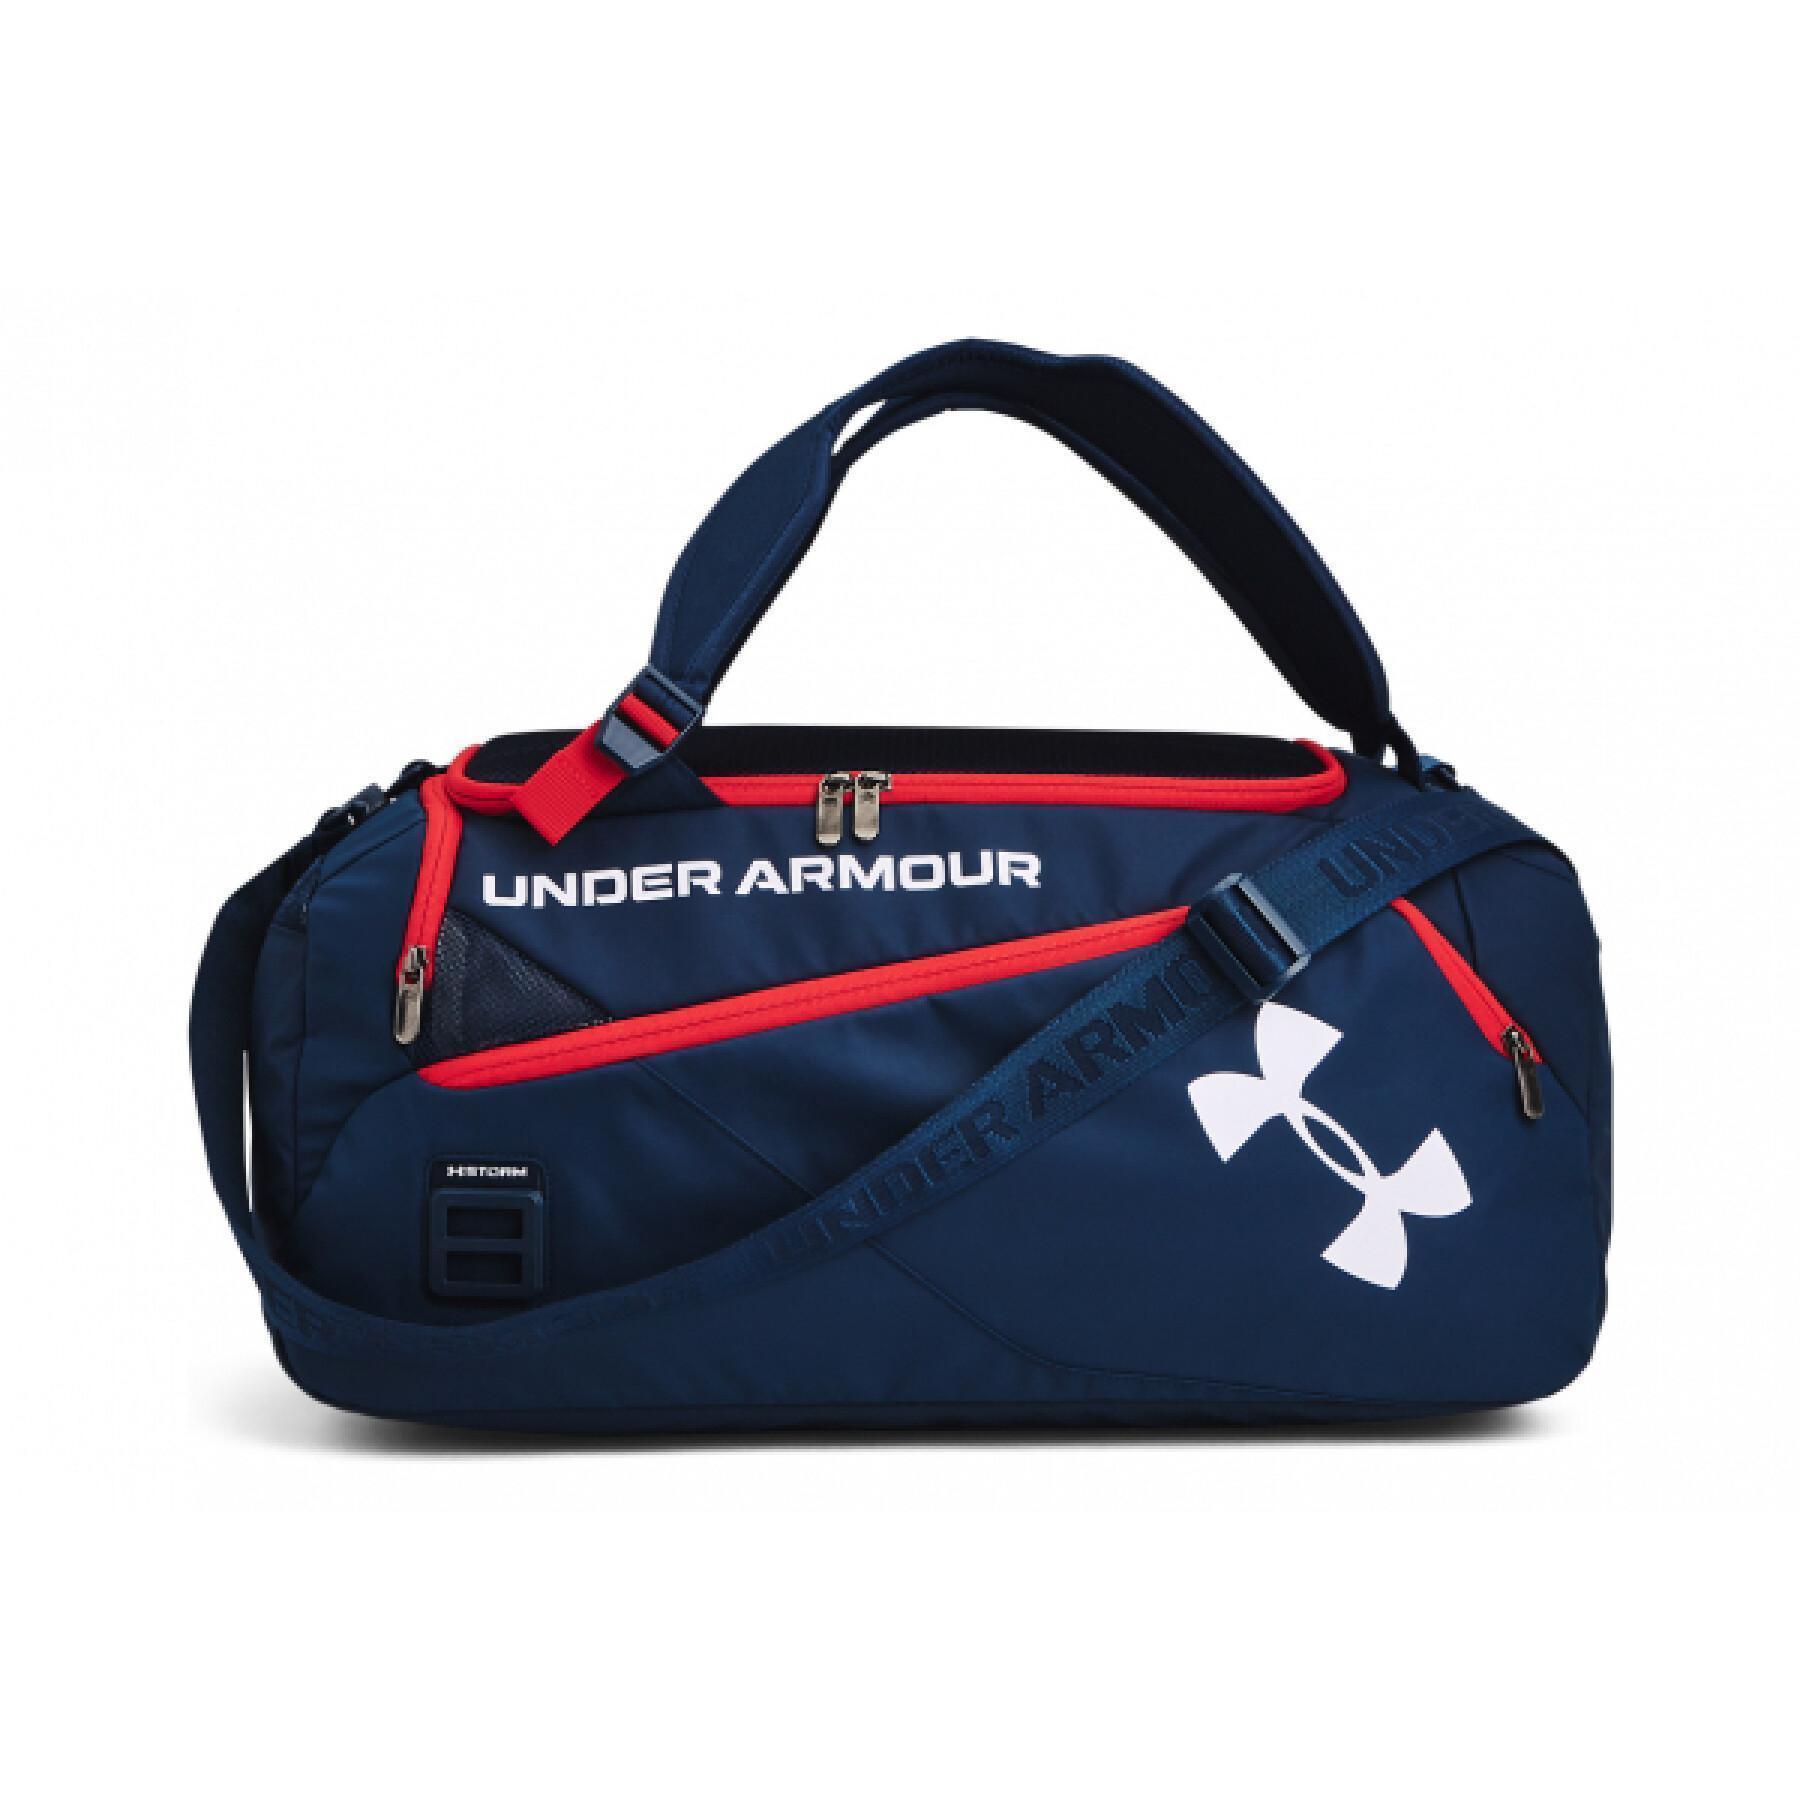 Small sports bag Under Armour Contain Duo